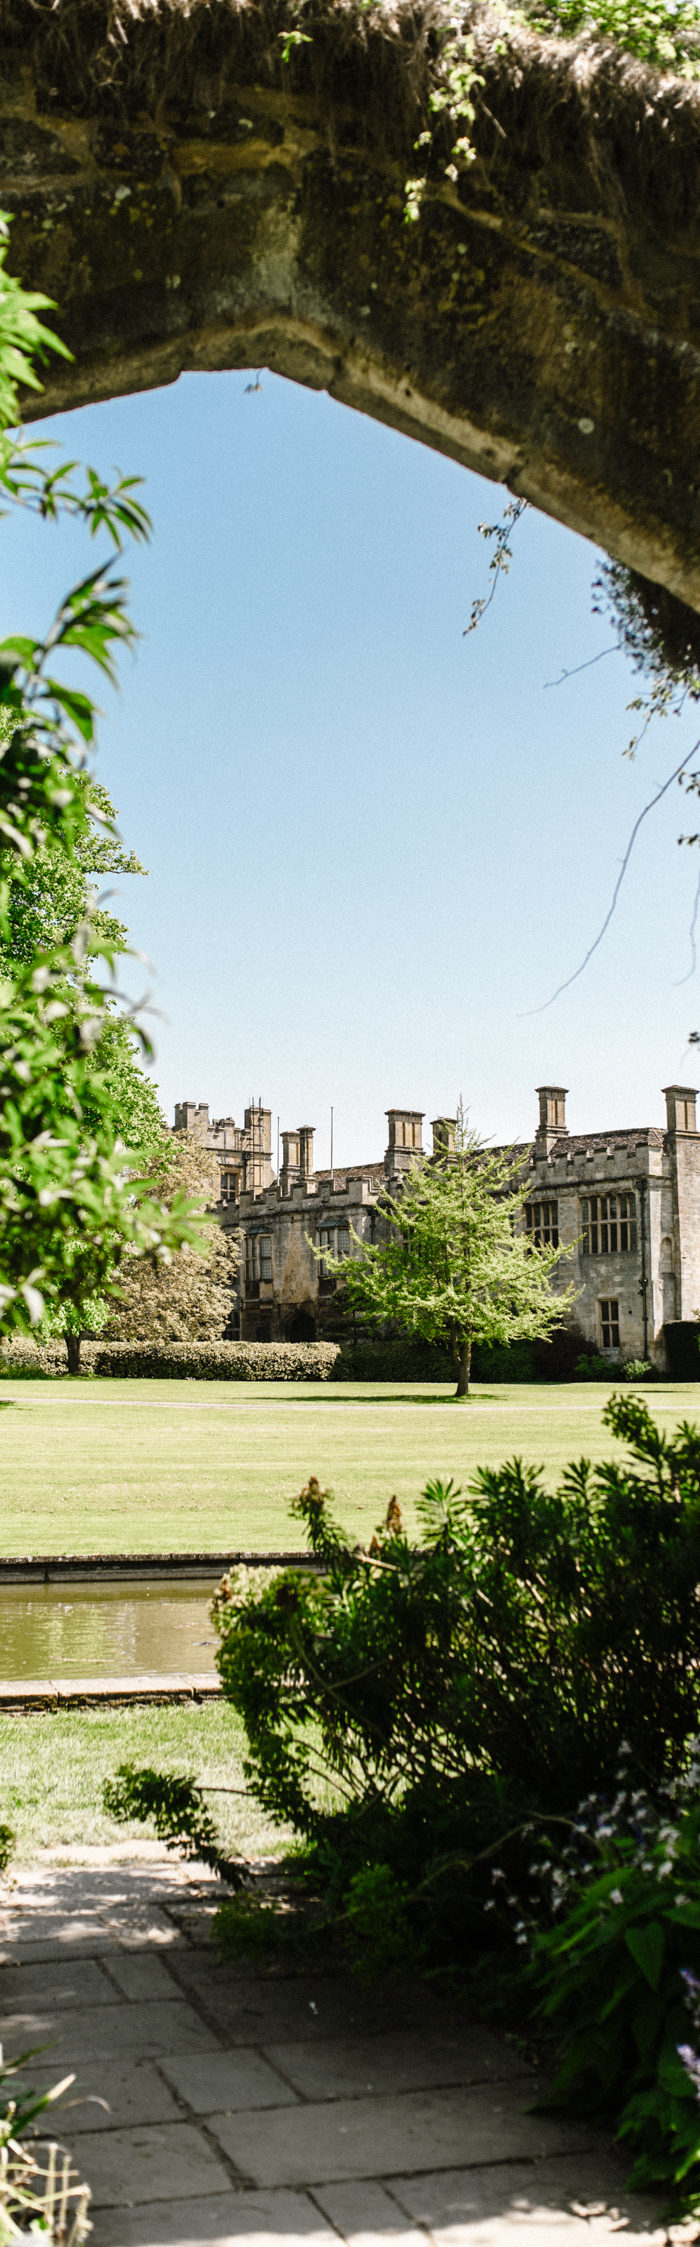 Alyssa Campanella of The A List blog visits Sudeley Castle in the Cotswolds